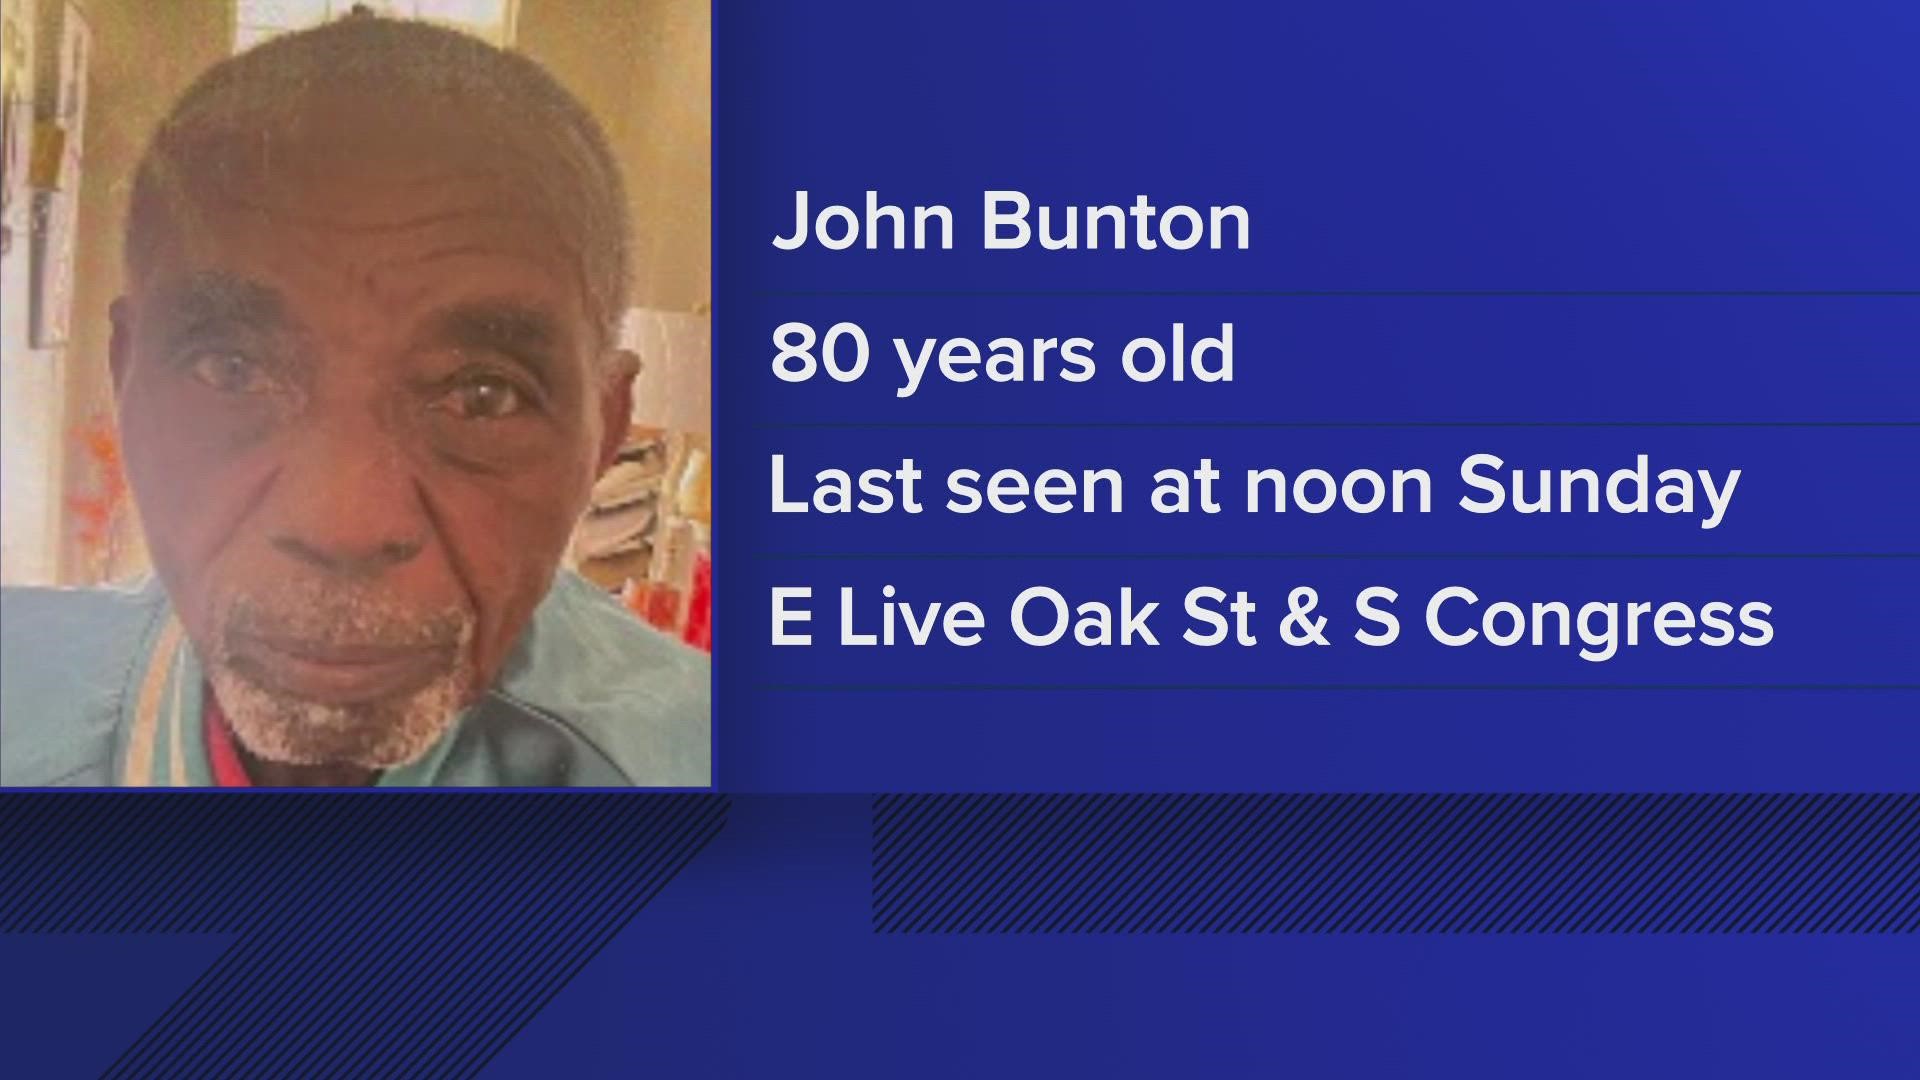 Austin police are trying to find an 80-year-old man who may be in danger.